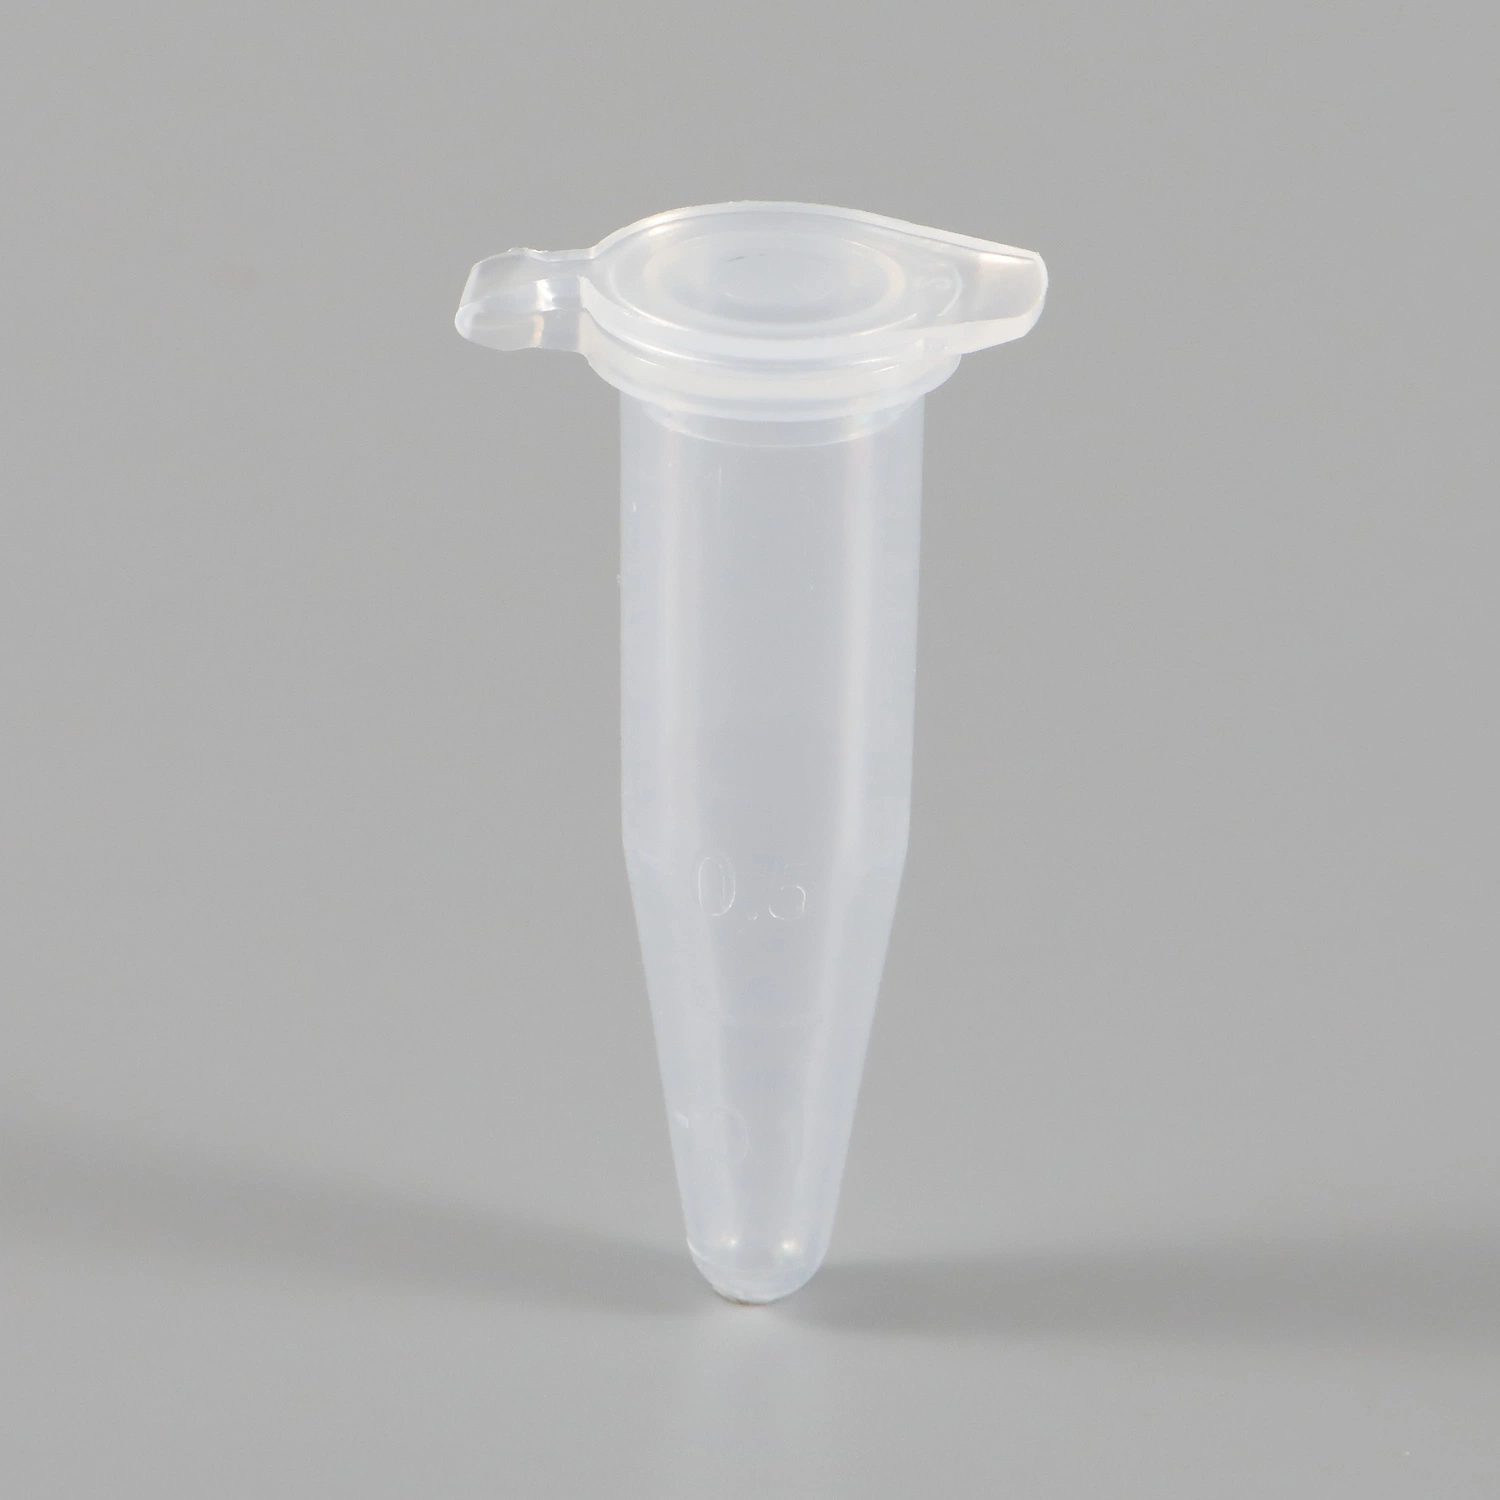 Easy observation Medical Laboratory Balloon inflation Device tubes d'extraction en plastique